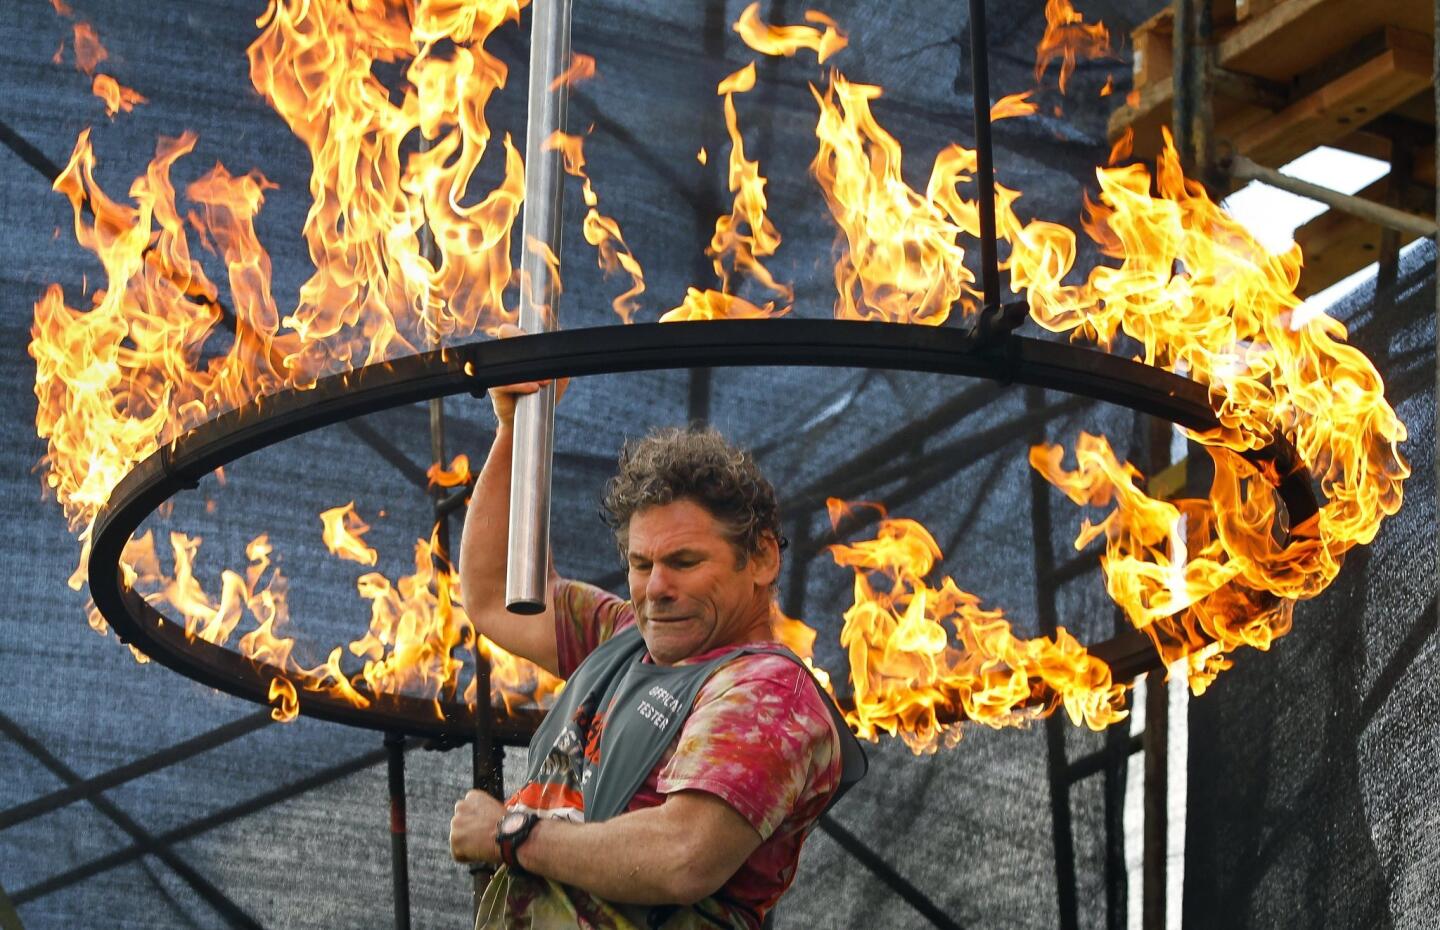 Roy Wallack, from Irvine, slides through the Ring of Fire as he and other volunteers tryout new features during the Tough Mudder Beta Test in Temecula on Saturday, November 1, 2014.